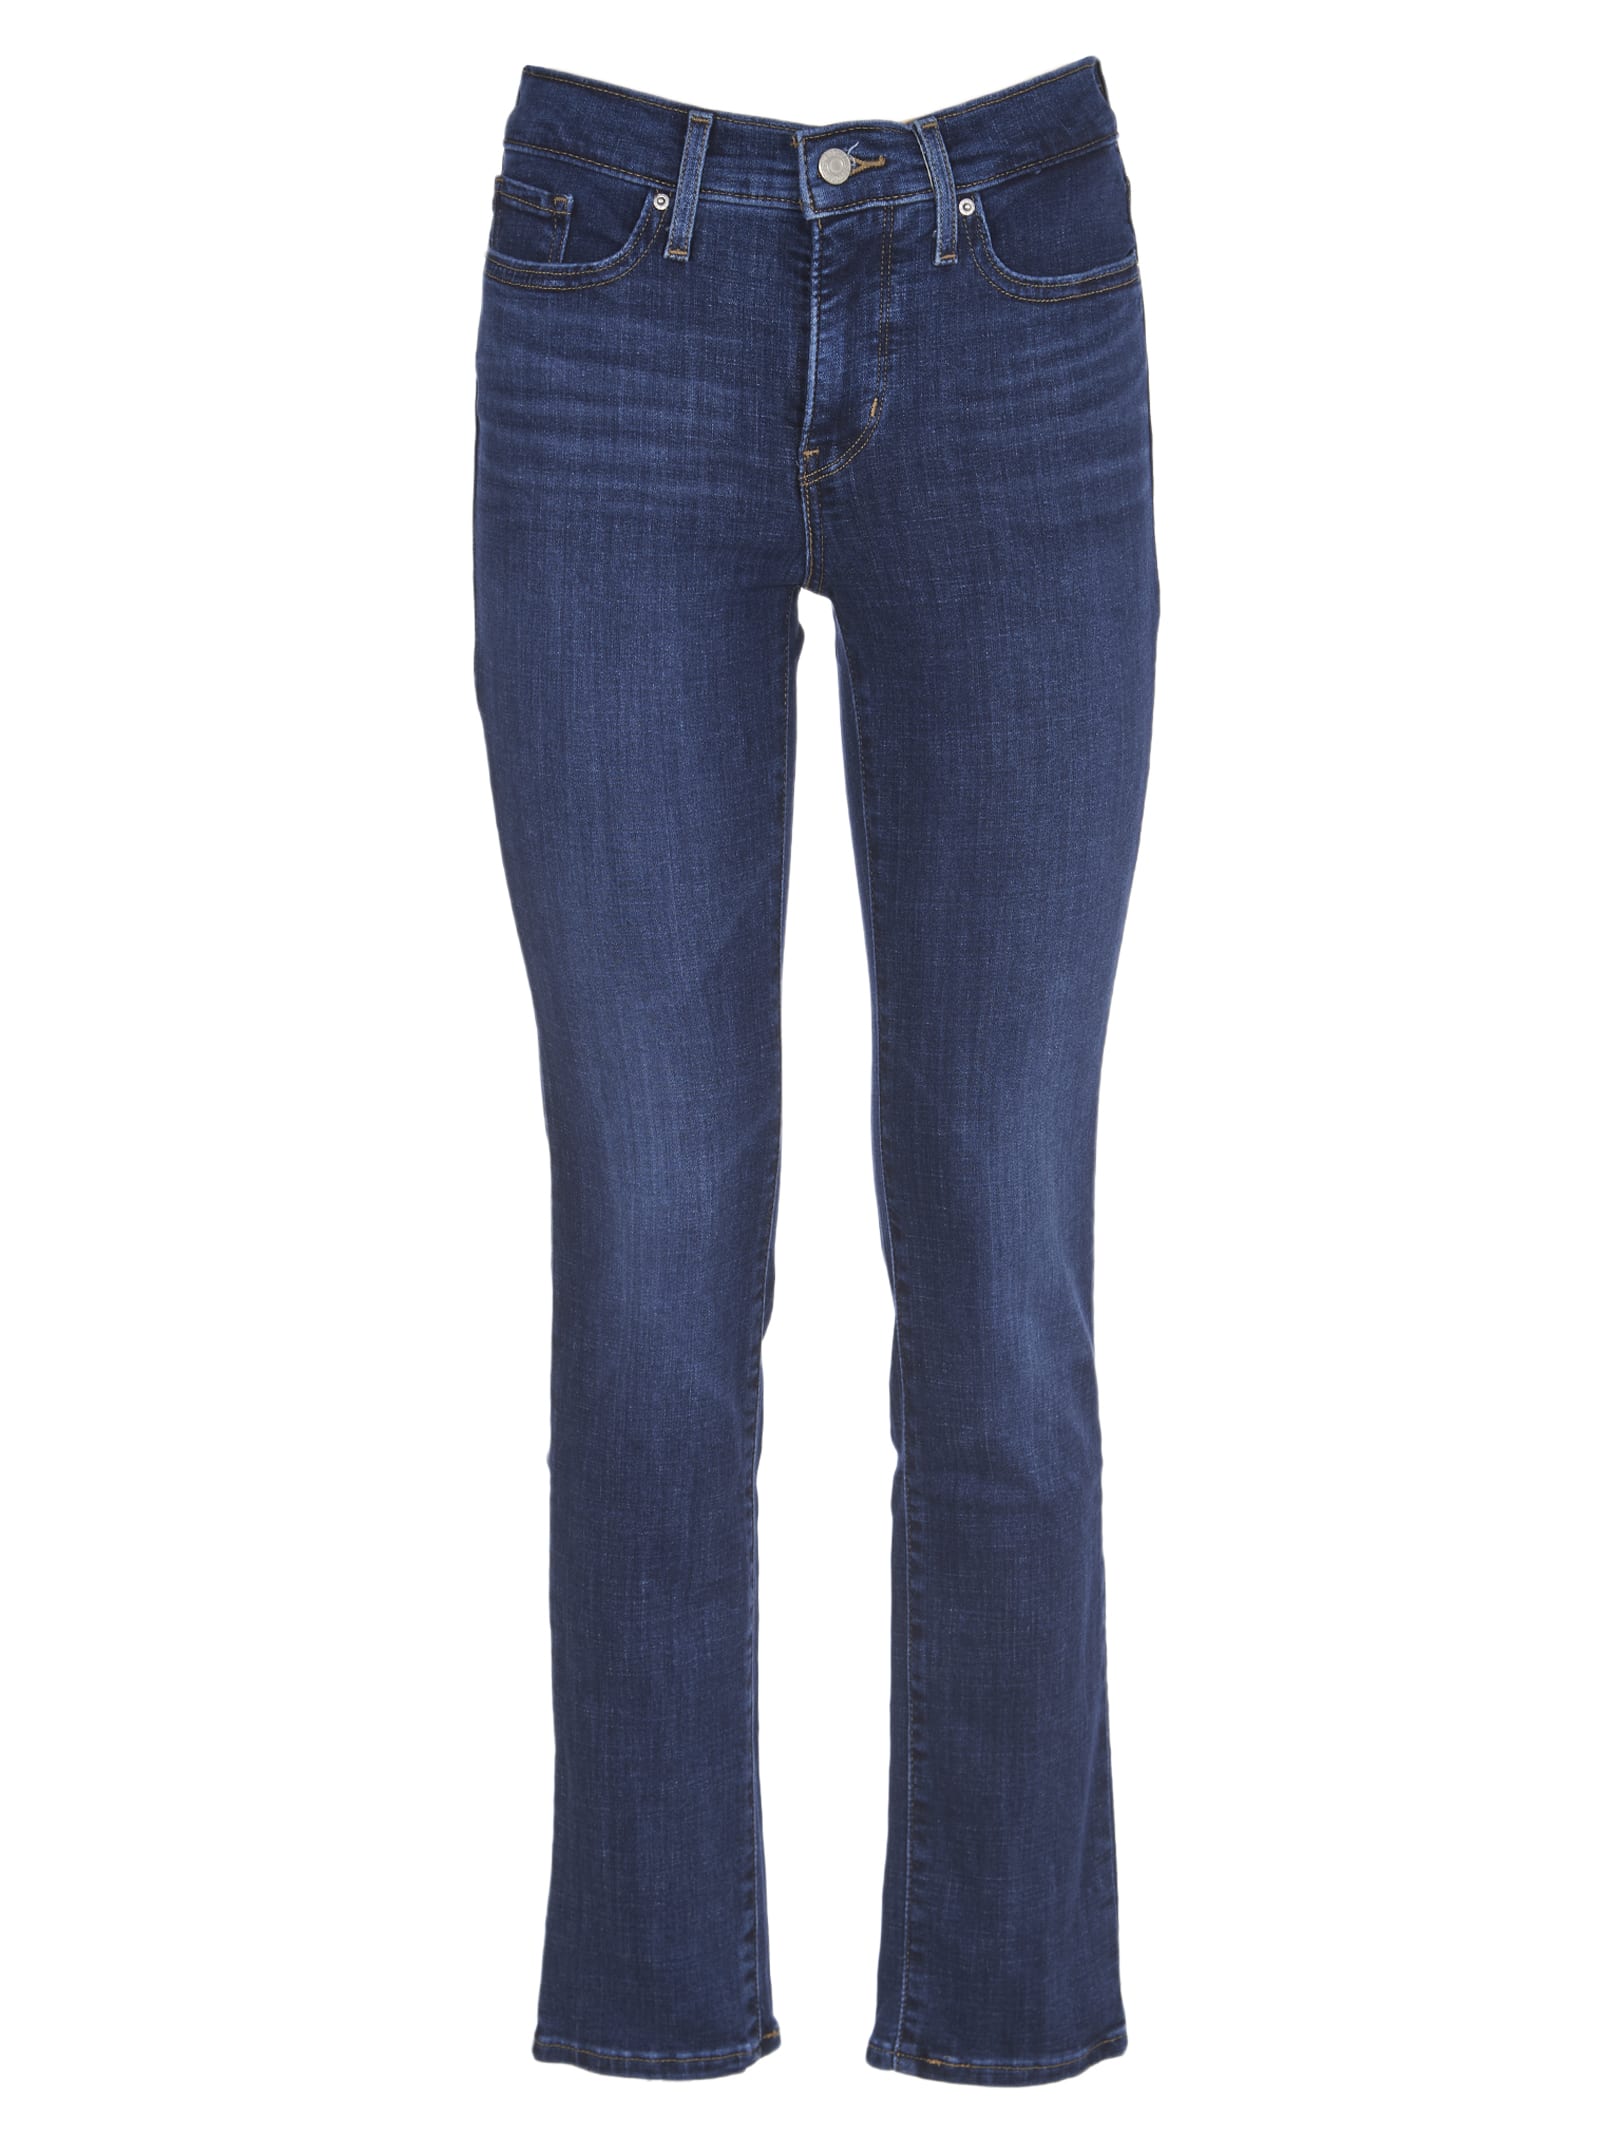 Levi's 312 Shaping Slim Jeans